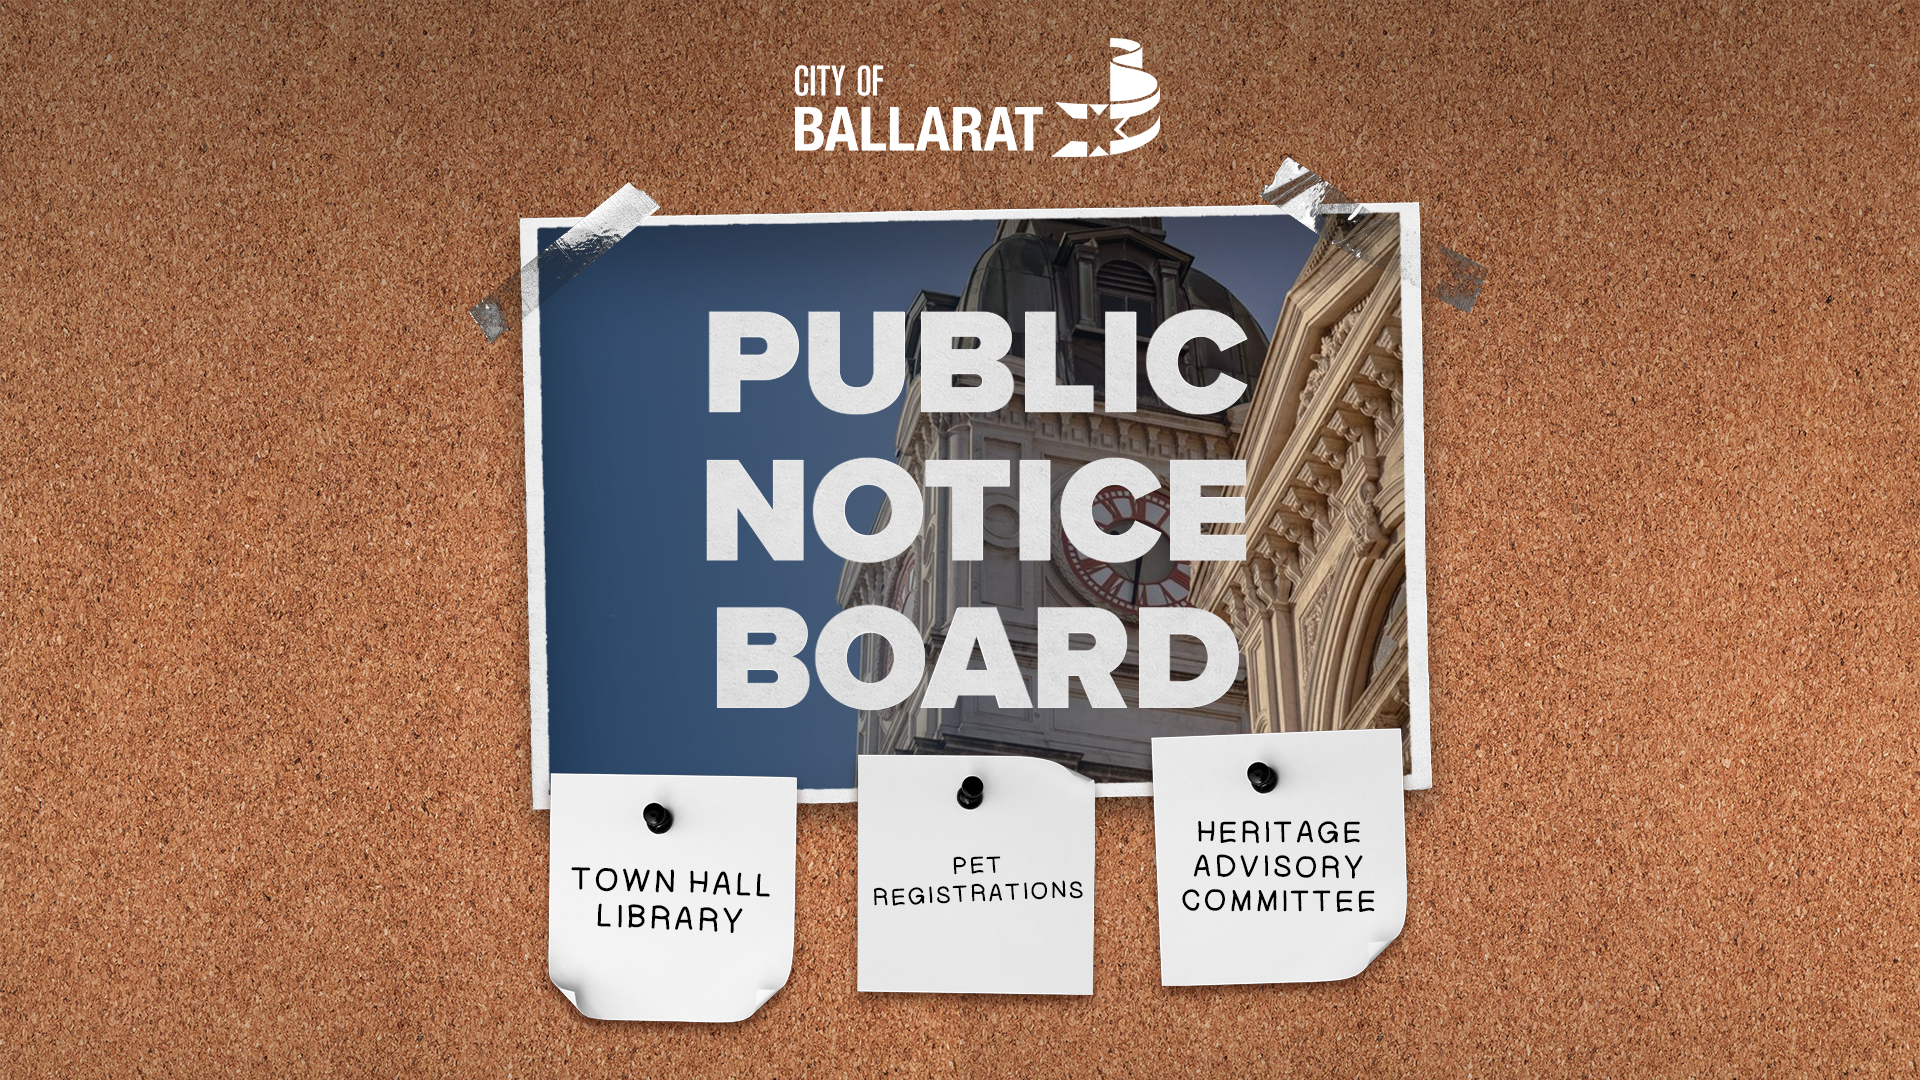 Notice board with Public Notice Board text over an image of Ballarat Town Hall. Three notes underneath with text saying Town Hall Library, Pet Registrations, Heritage Advisory Committee